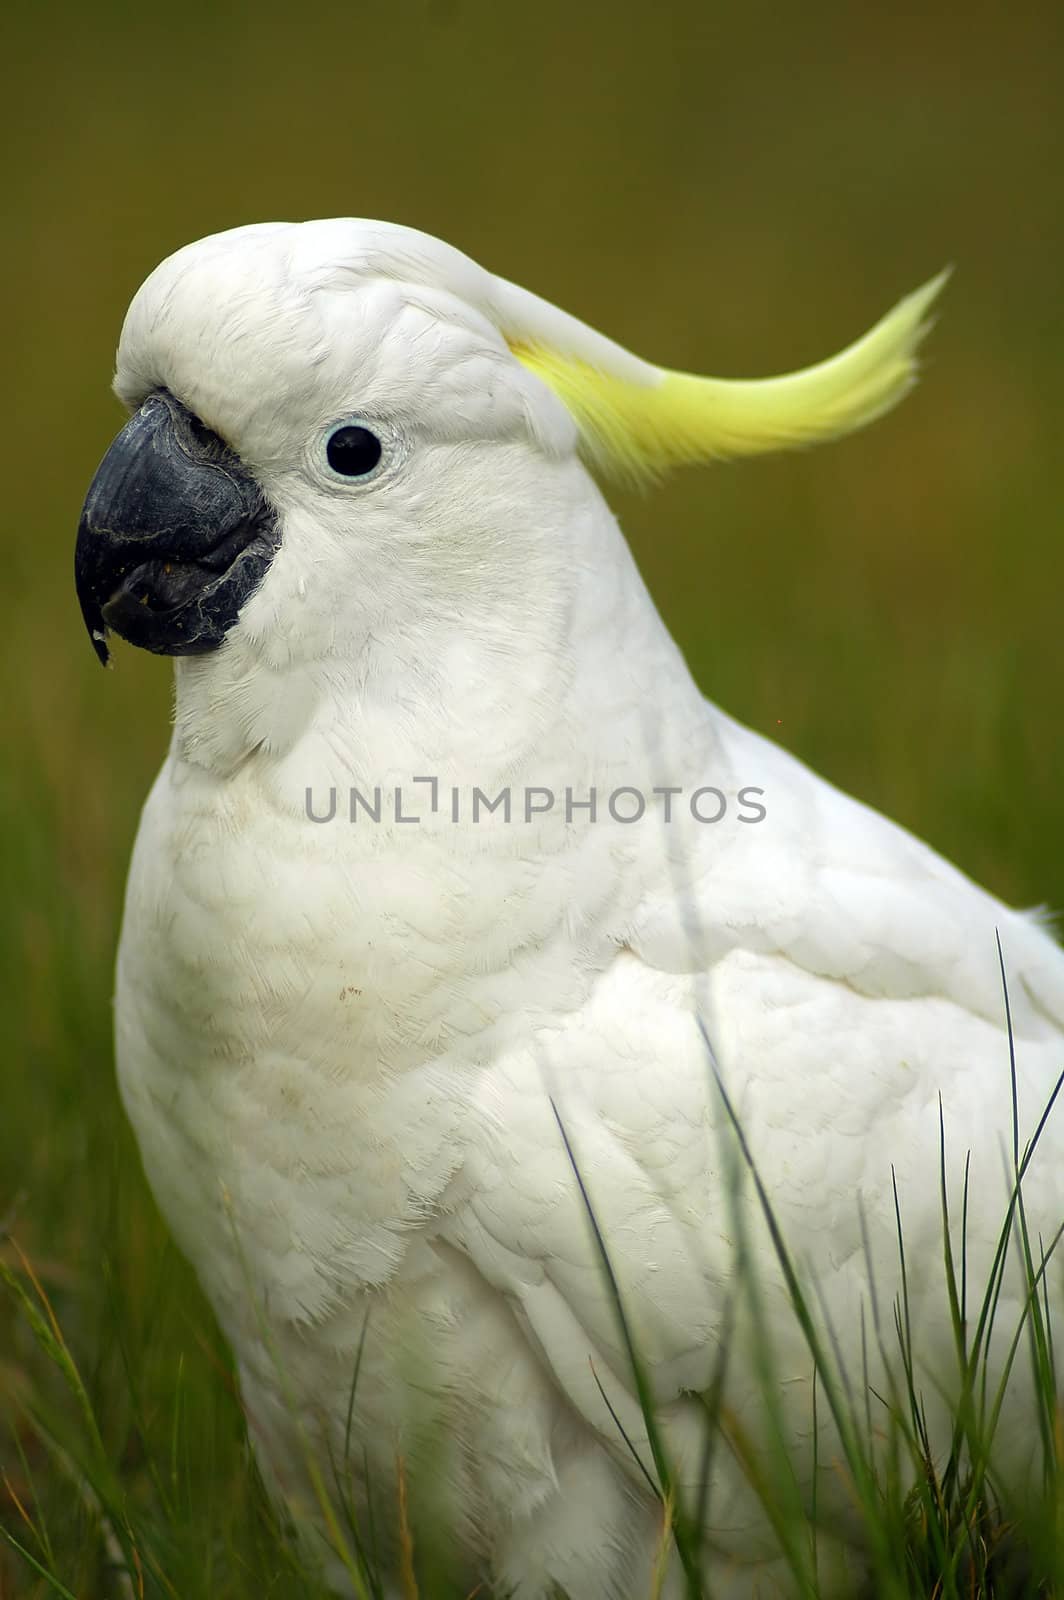 white parrot with yellow feathers on head